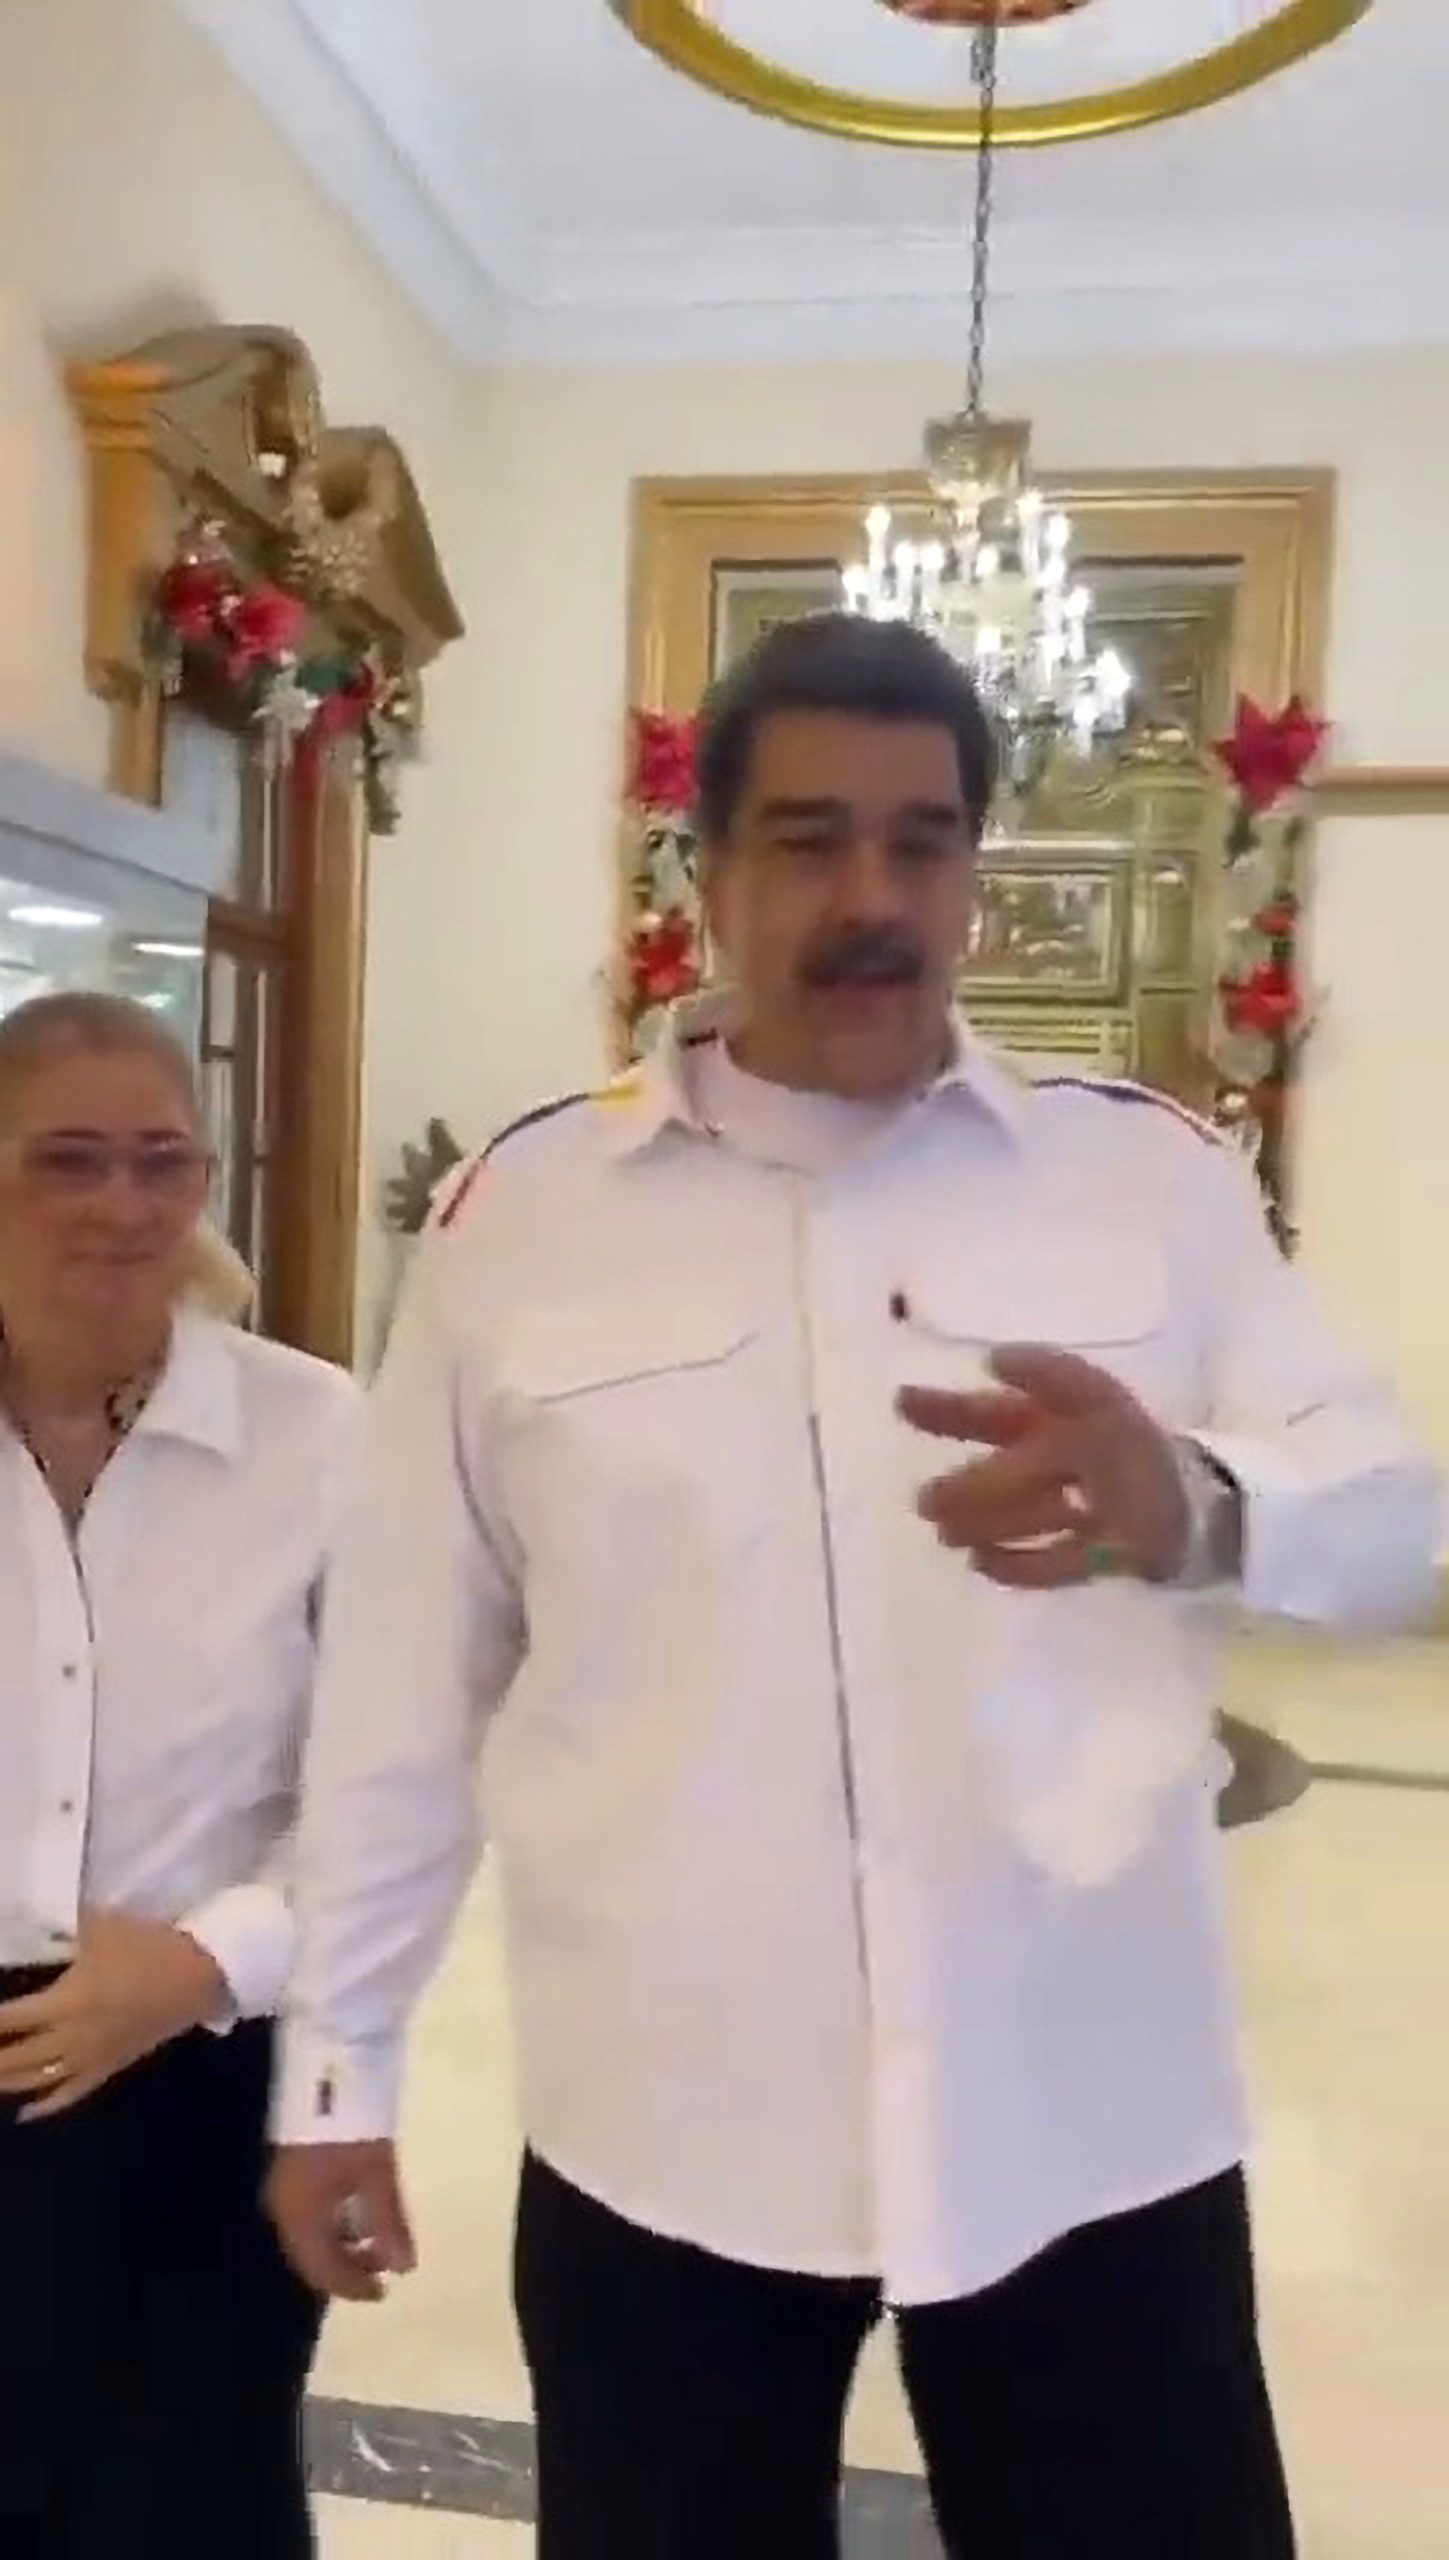 Read more about the article Bonkers Venezuela President Shows Off Festive Decor While Calling Xmas Early To Mask Mass Poverty Figures